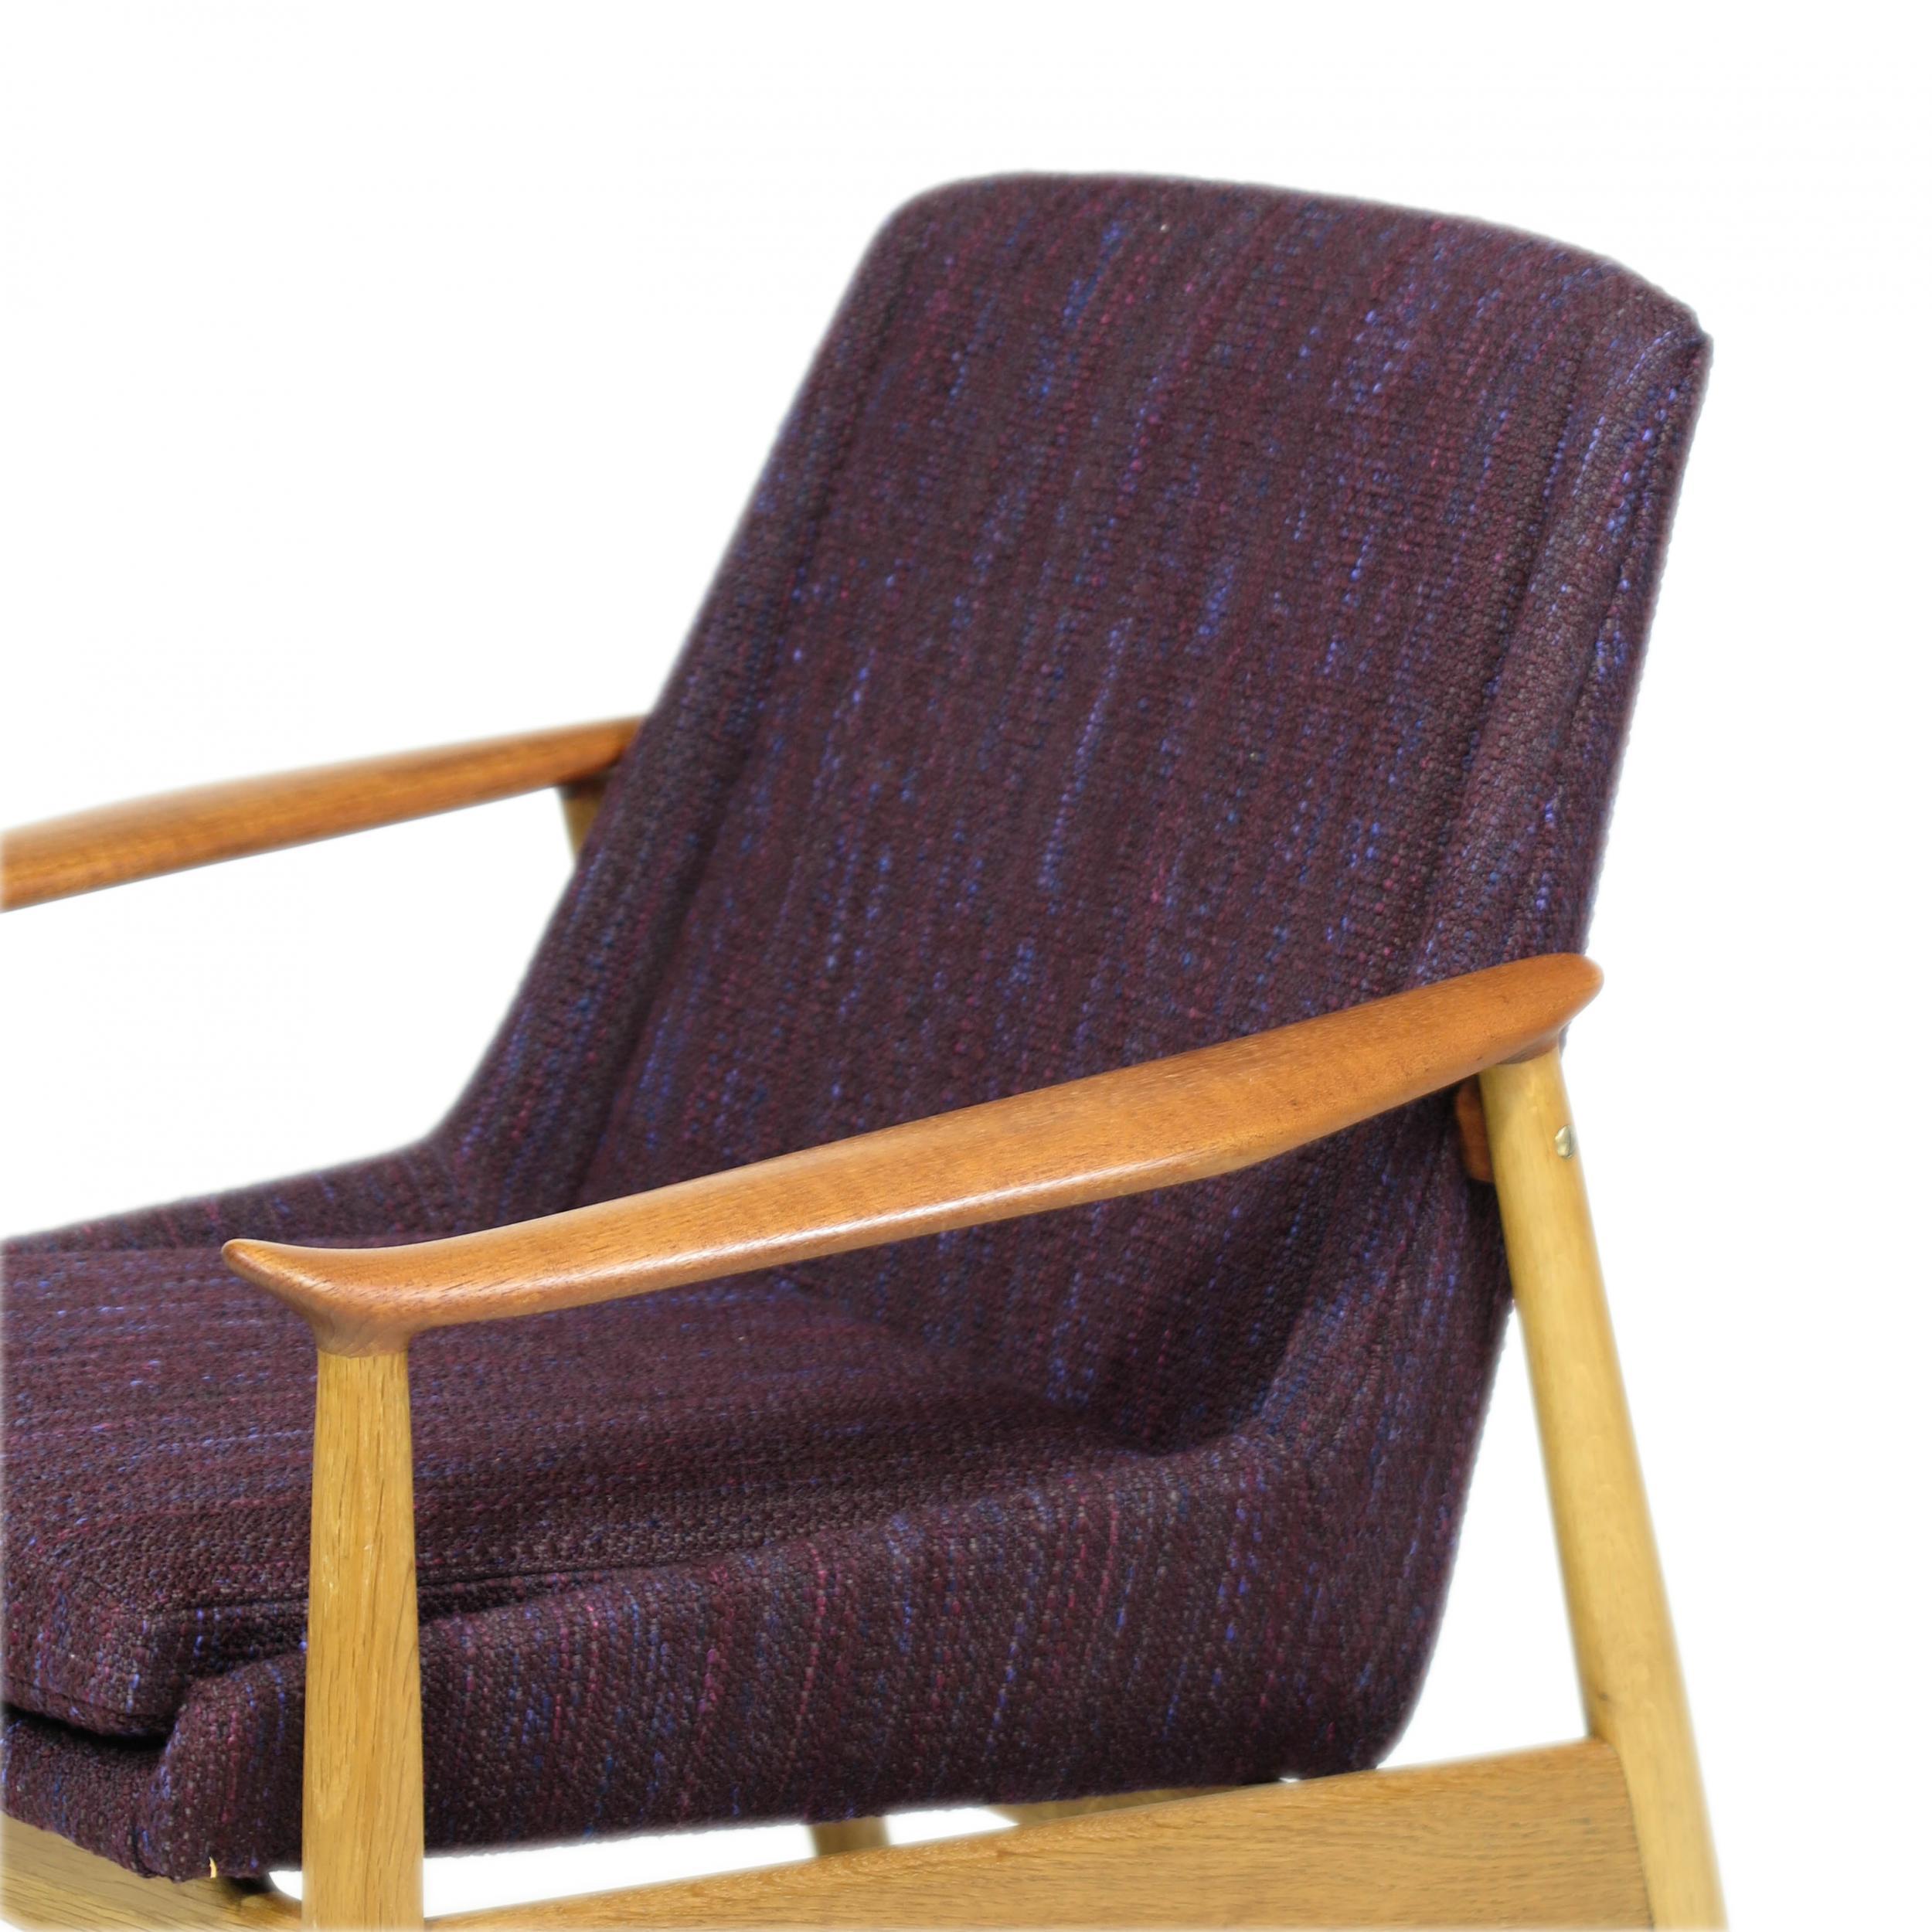 Danish easy chair designed by Arne Vodder for Slagelse Mobelveark, model 810 circa 1959, Denmark. Chair crafted of a solid oak frame with sculpted teak arms, and newly upholstered in Knoll Rivington textile. Finely restored in excellent condition